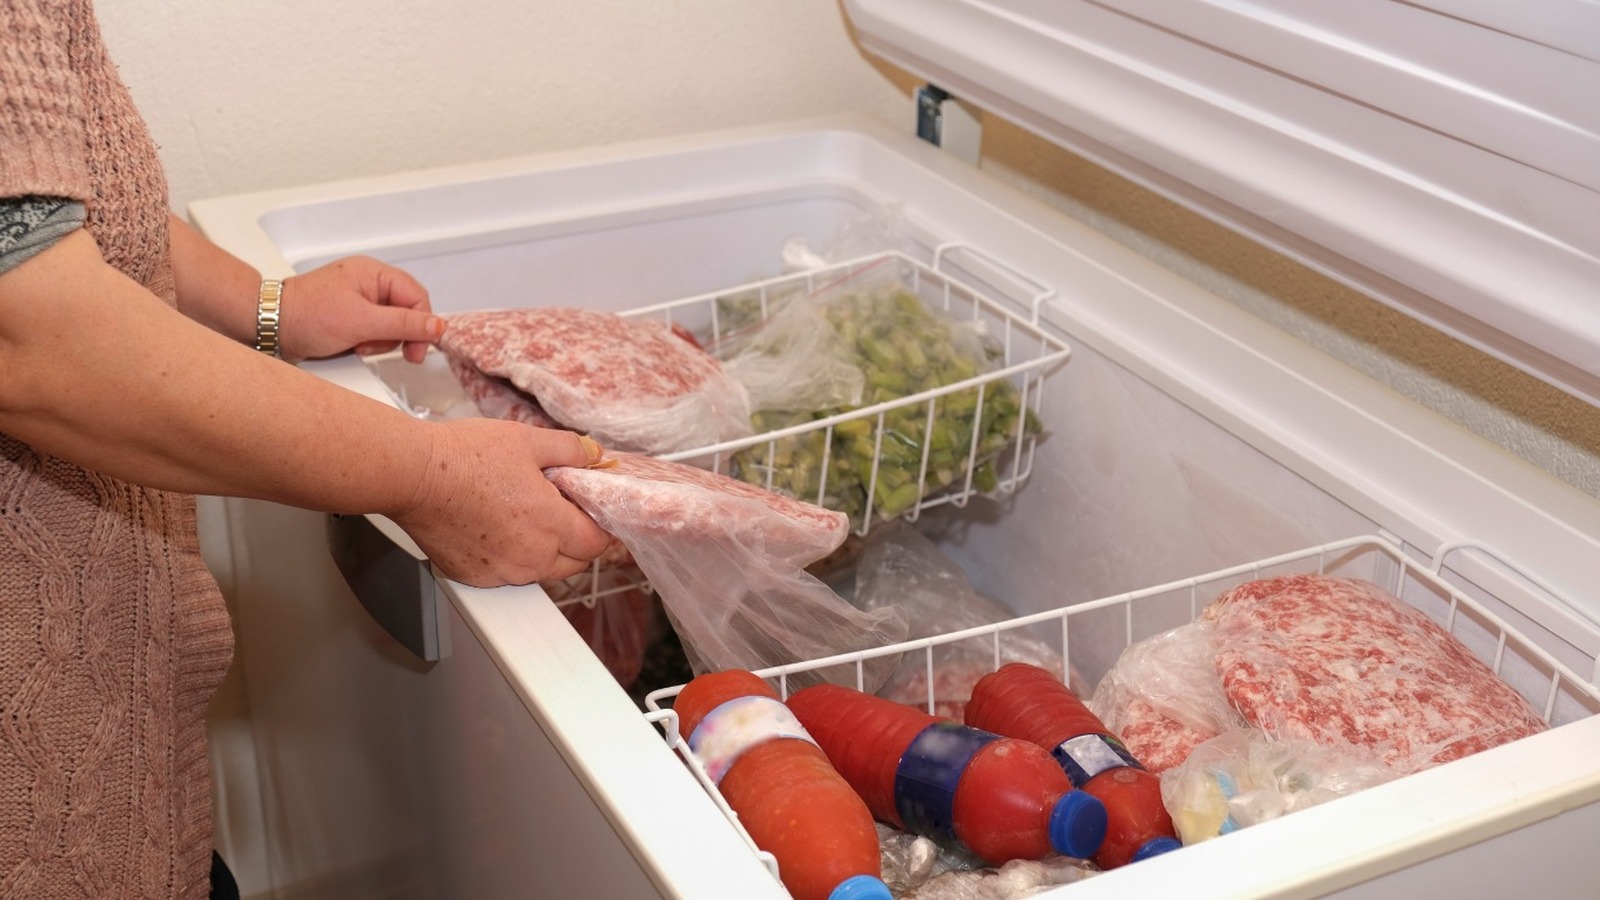 Staying Warm and Safe in the Freezer: The Importance of Insulated